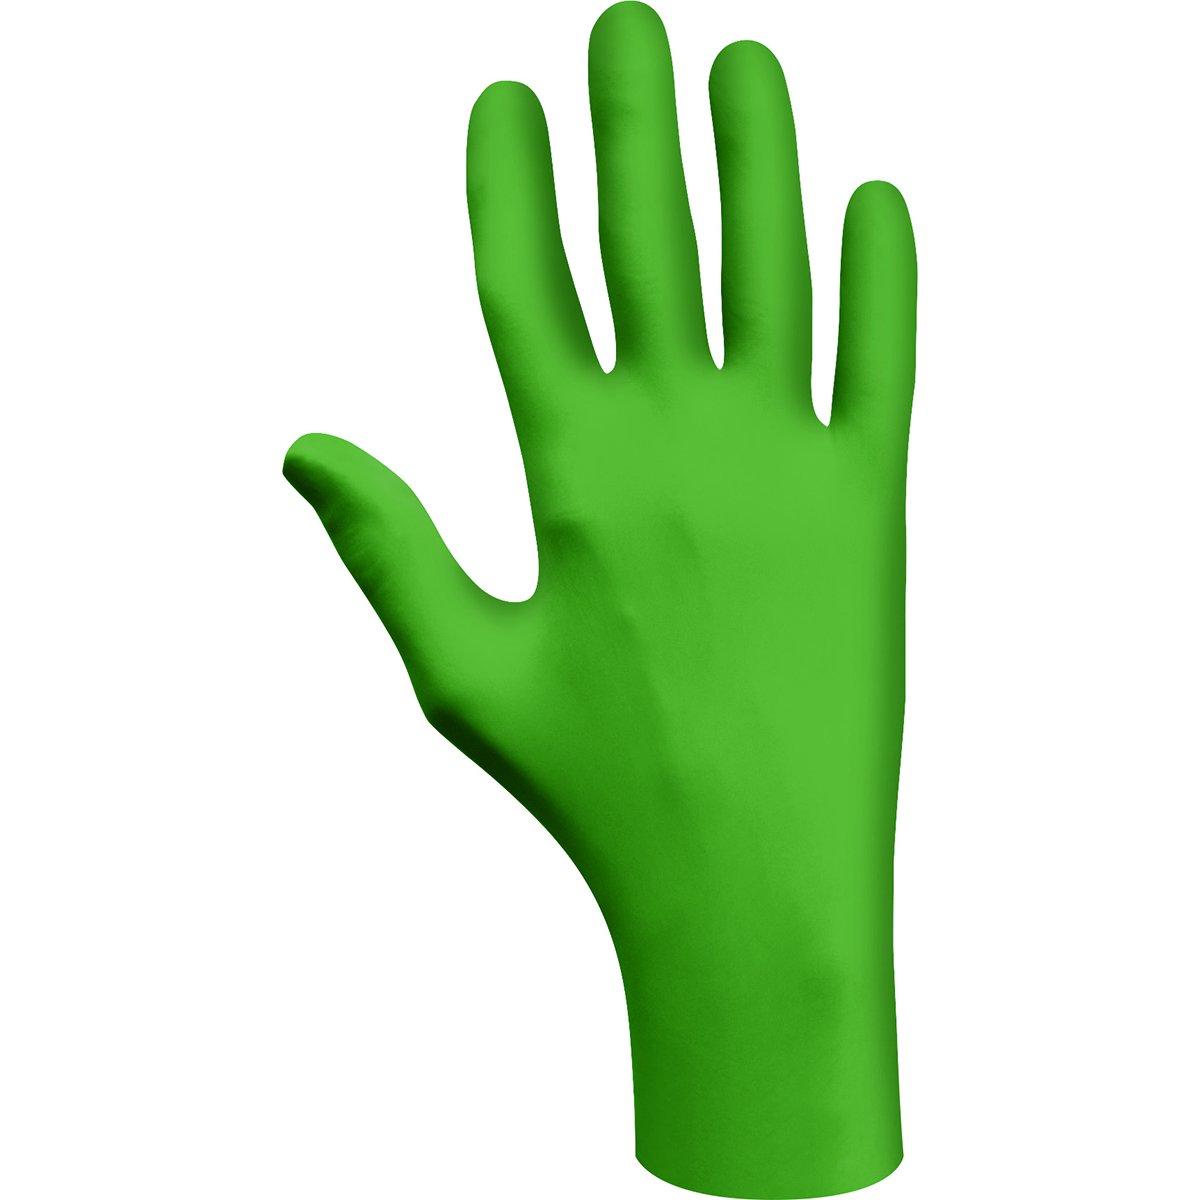 SHOWA 6110PF Biodegradable Nitrile Powder-Free Disposable Safety Glove, Food Safe, 4 mil Thick, 9.5